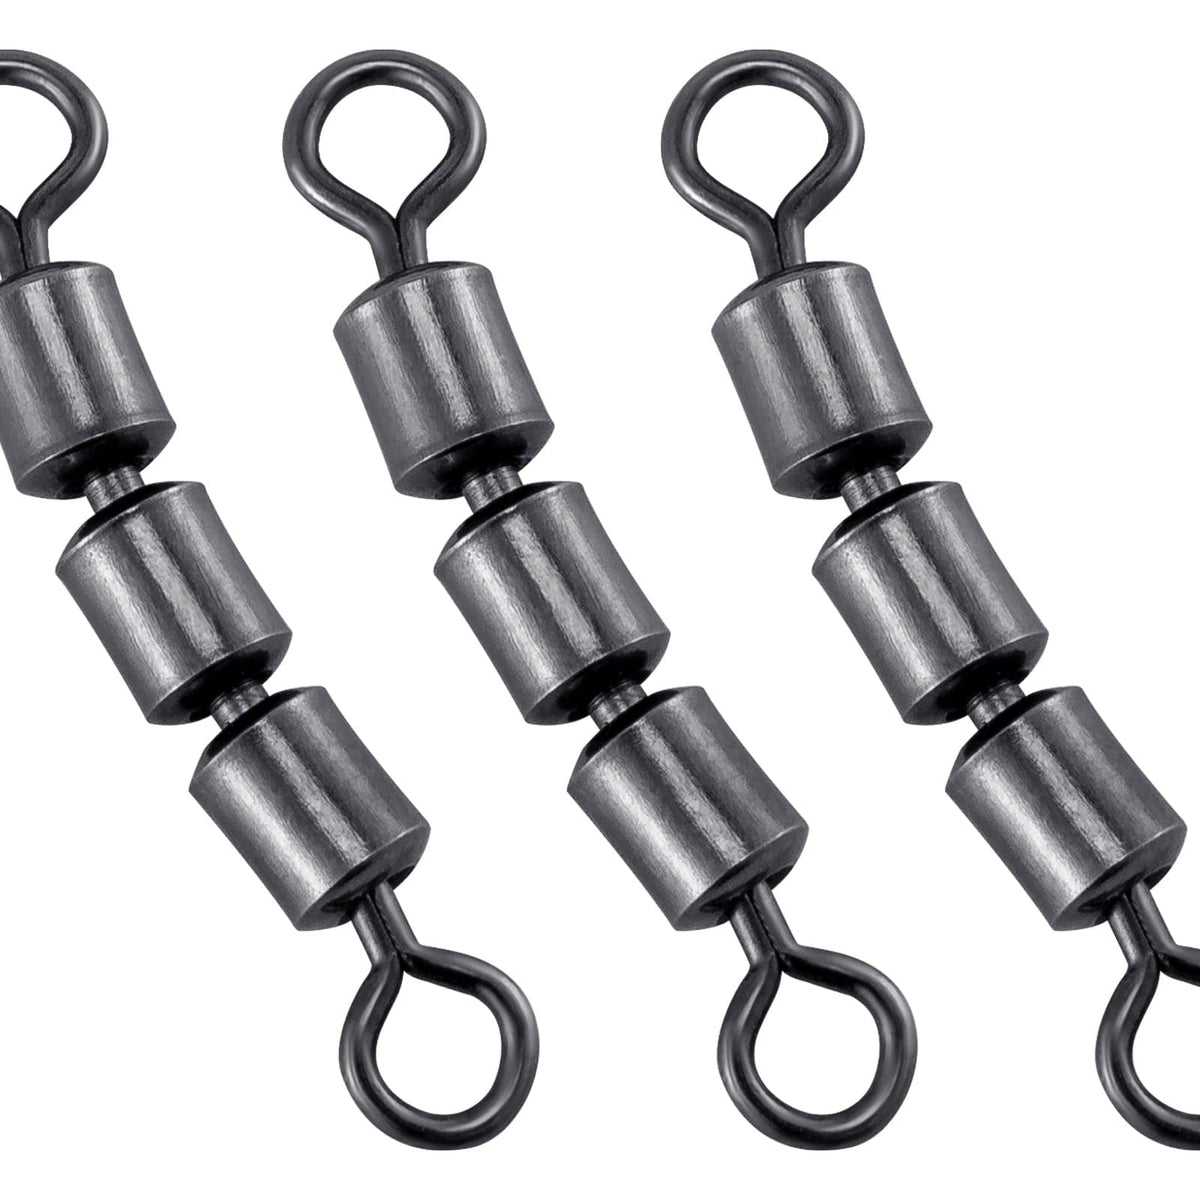 Fishing Swivel - Stainless Bead Chain Swivels 4-6 Balls Catfish Tackle – Dr. Fish Tackles